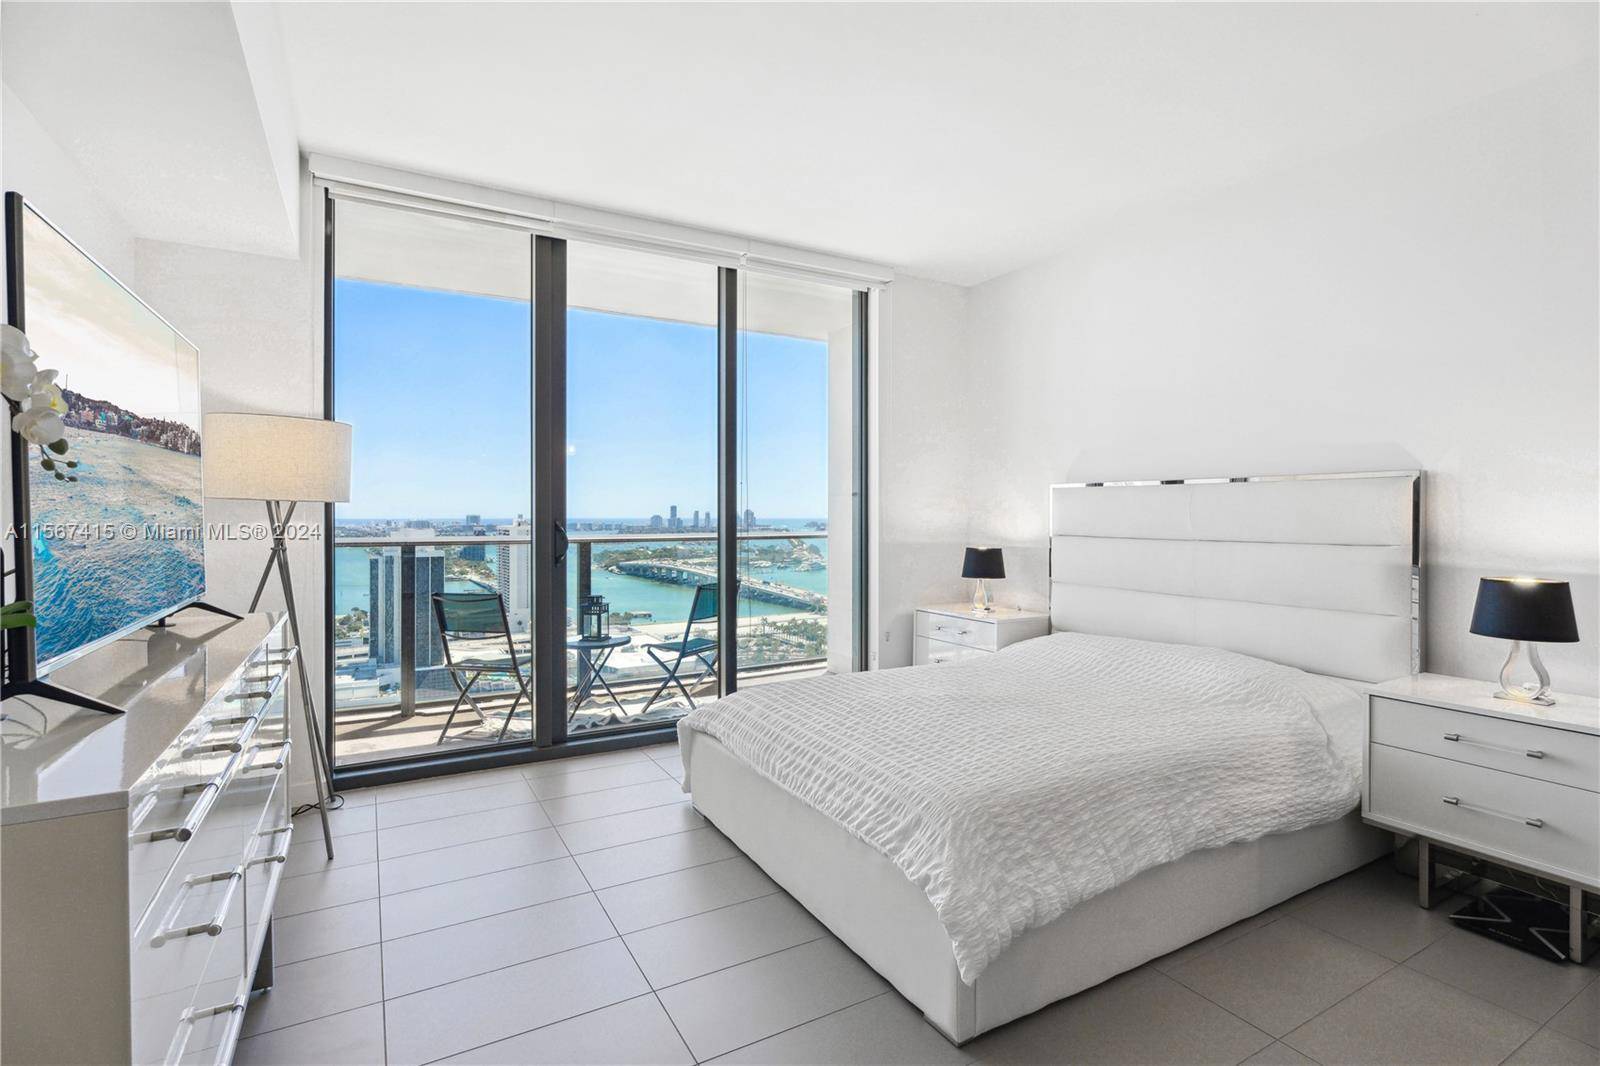 Situated in the heart of Miami's Arts Entertainment District, this high floor, turnkey, fully furnished residence offers panoramic views of Biscayne Bay, Miami Beach, Port of Miami, and the Miami ...